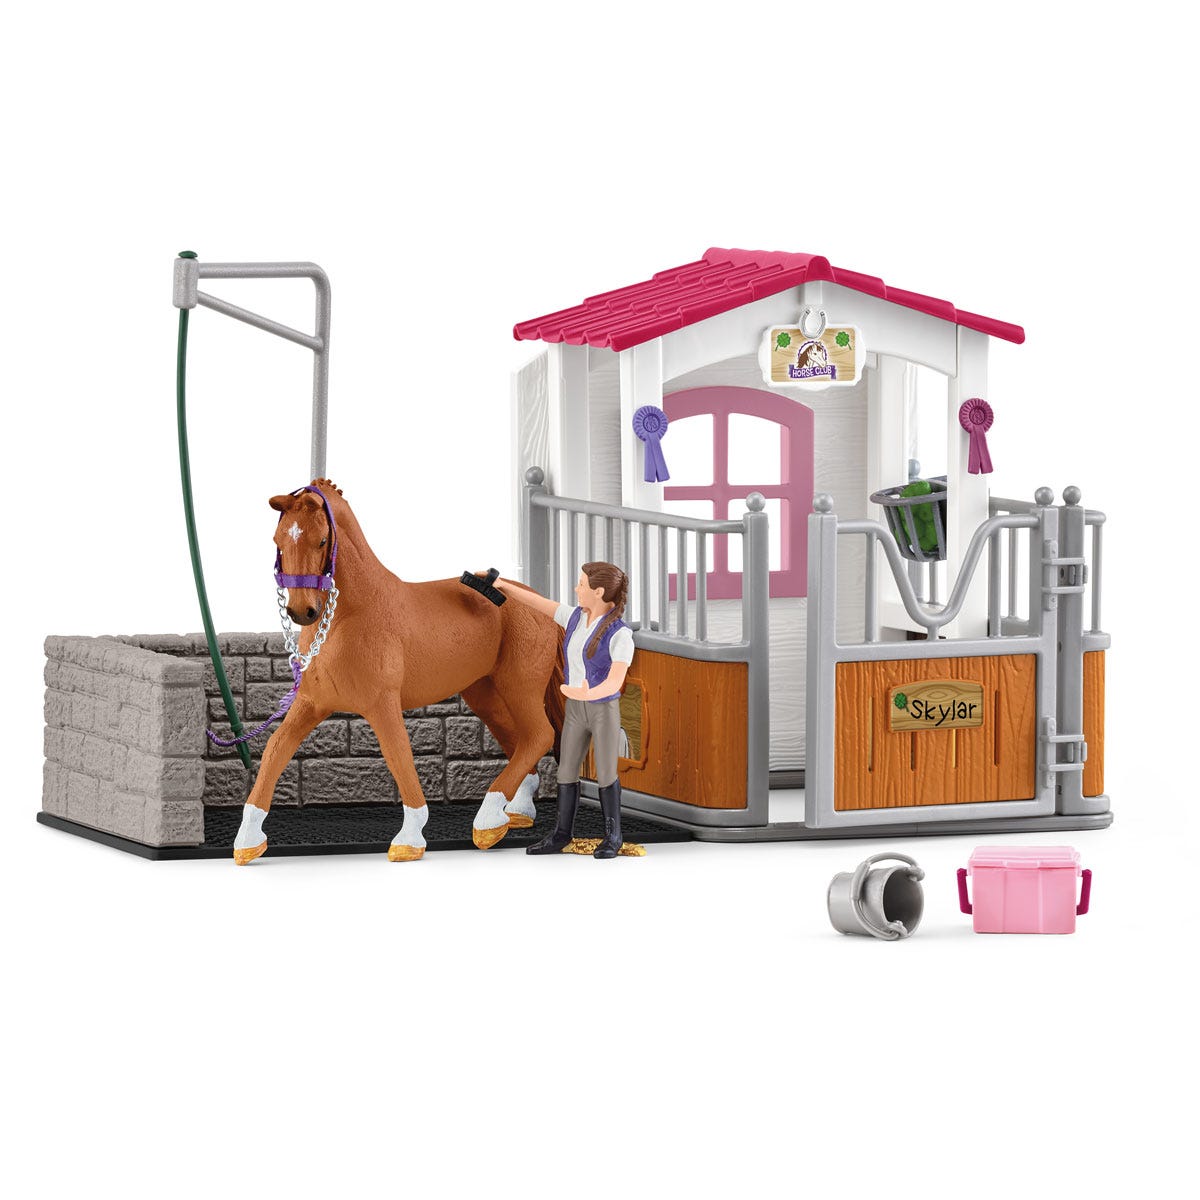 Wash station with horse stall